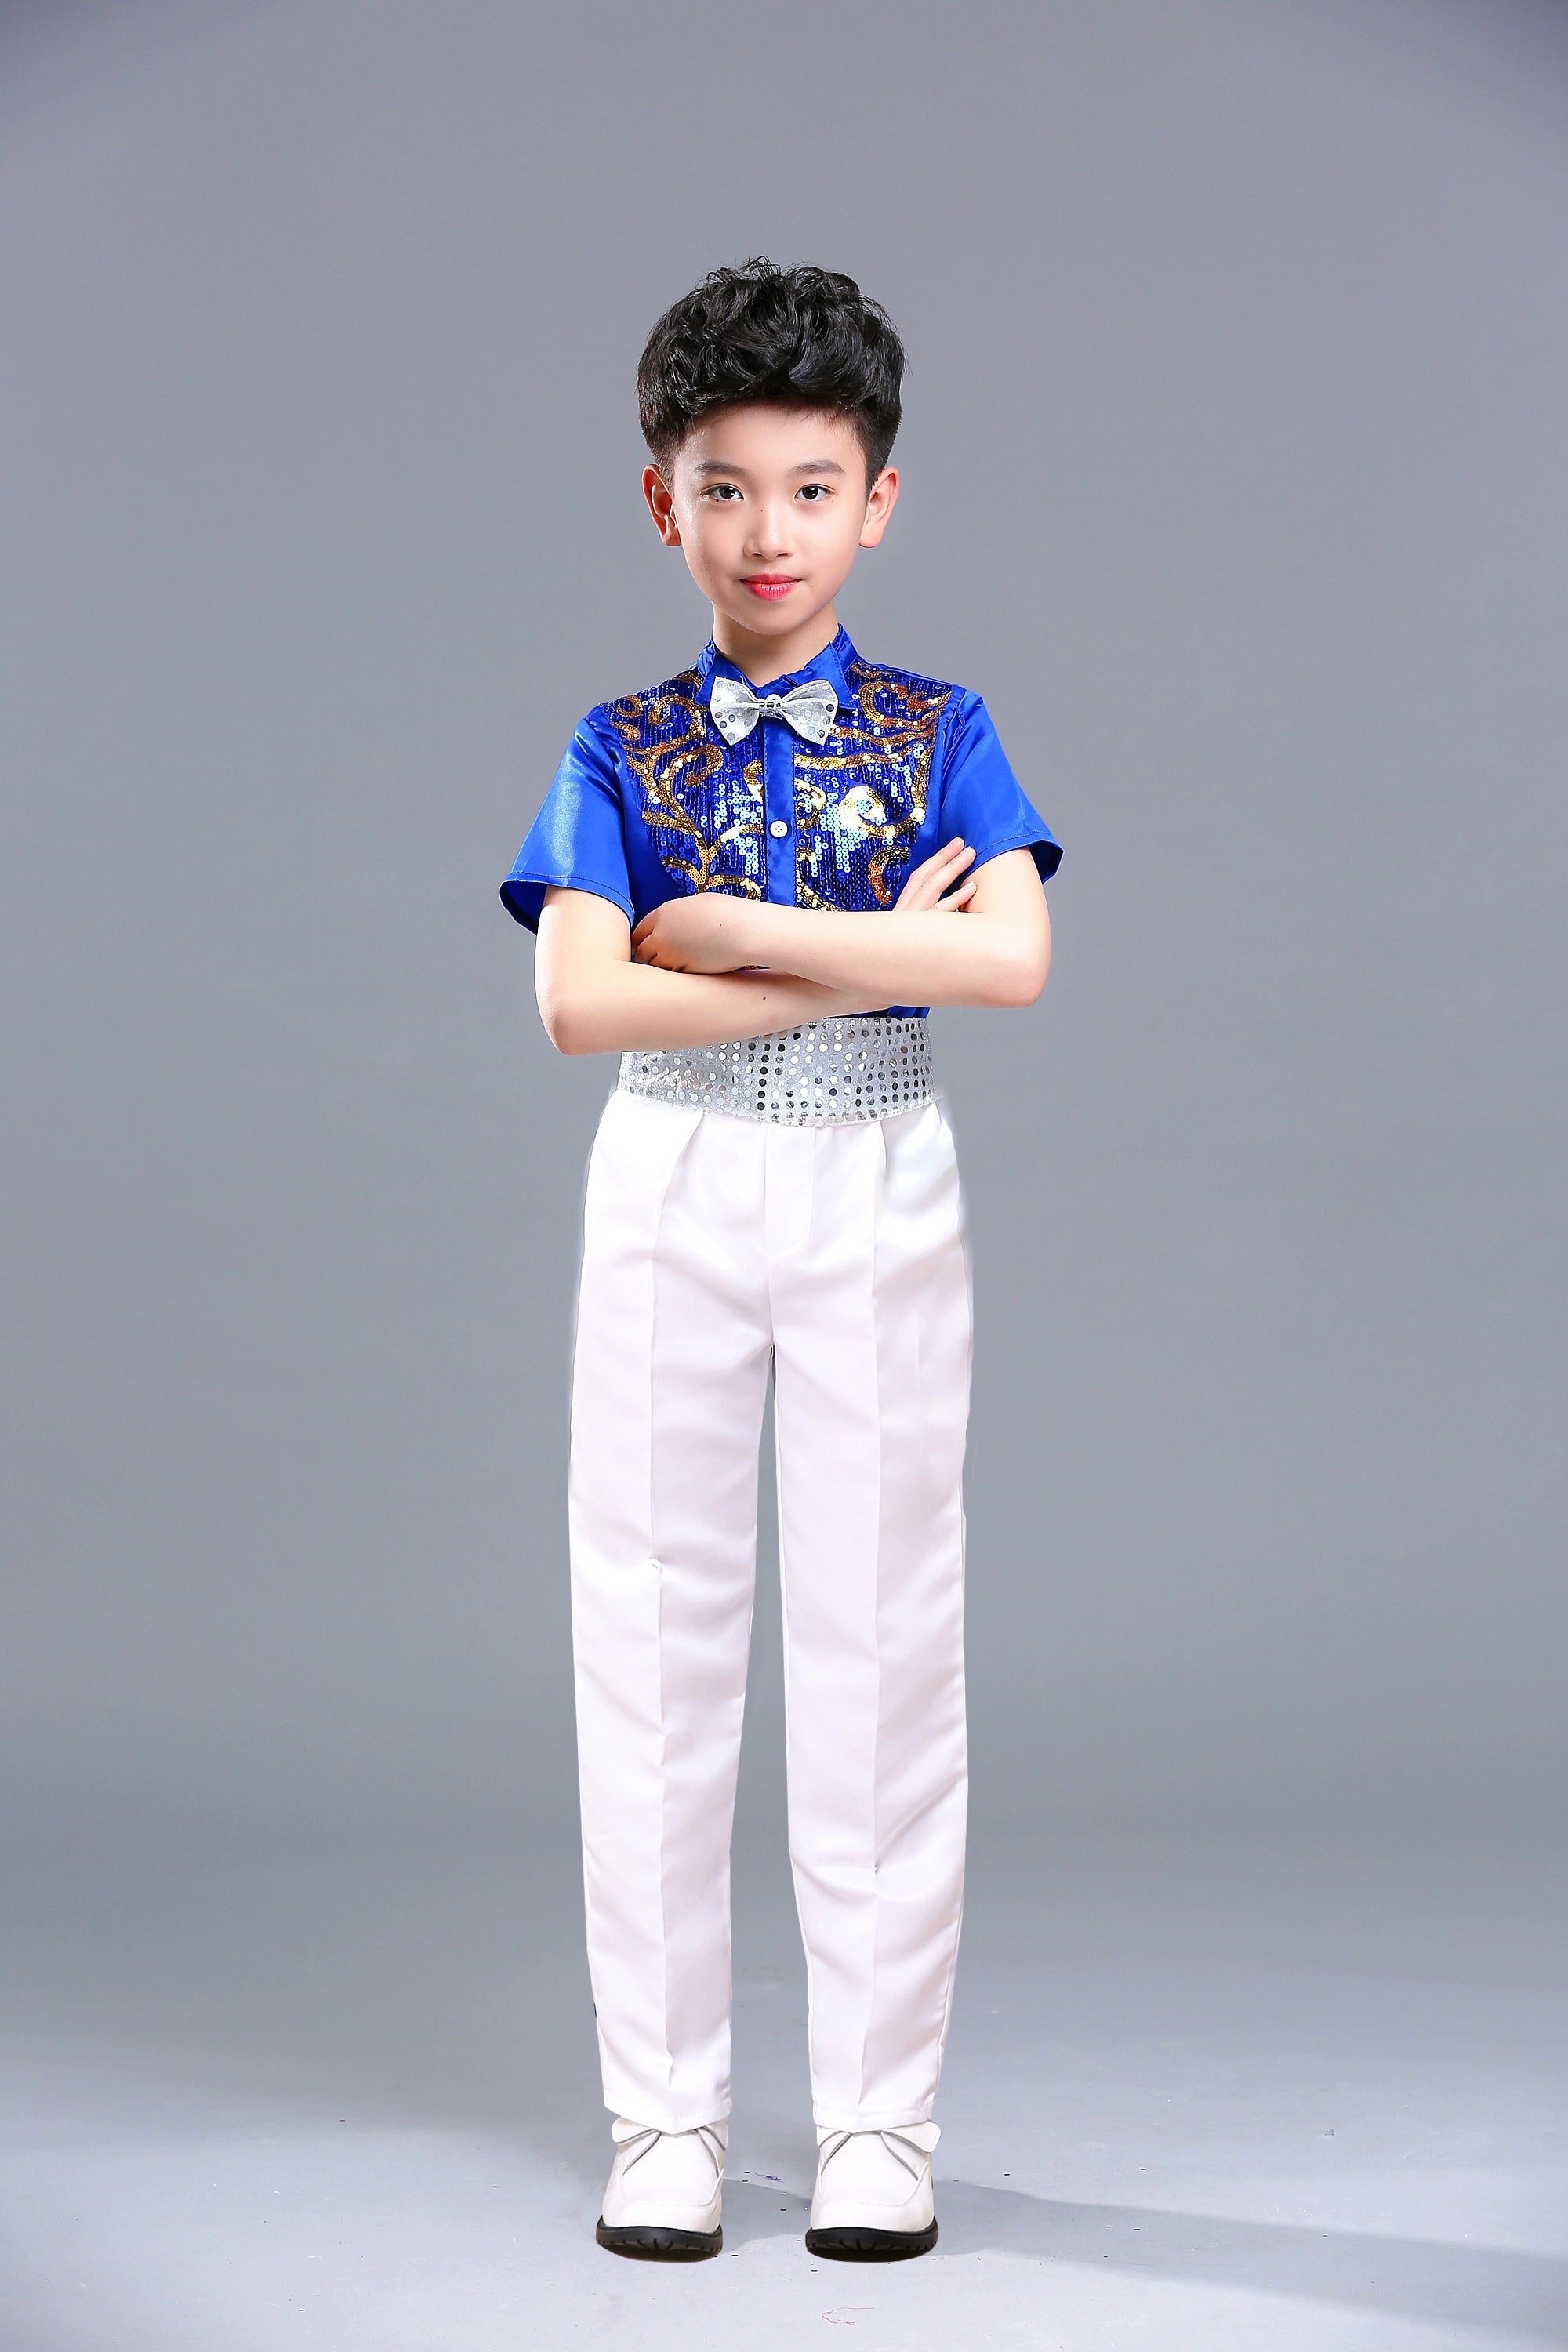 Boys Hip Hop Costume Sequin Shirts White Pants Suit Jazz Costumes Kids Stage Dancing Outfit Children Street Show Wear - 